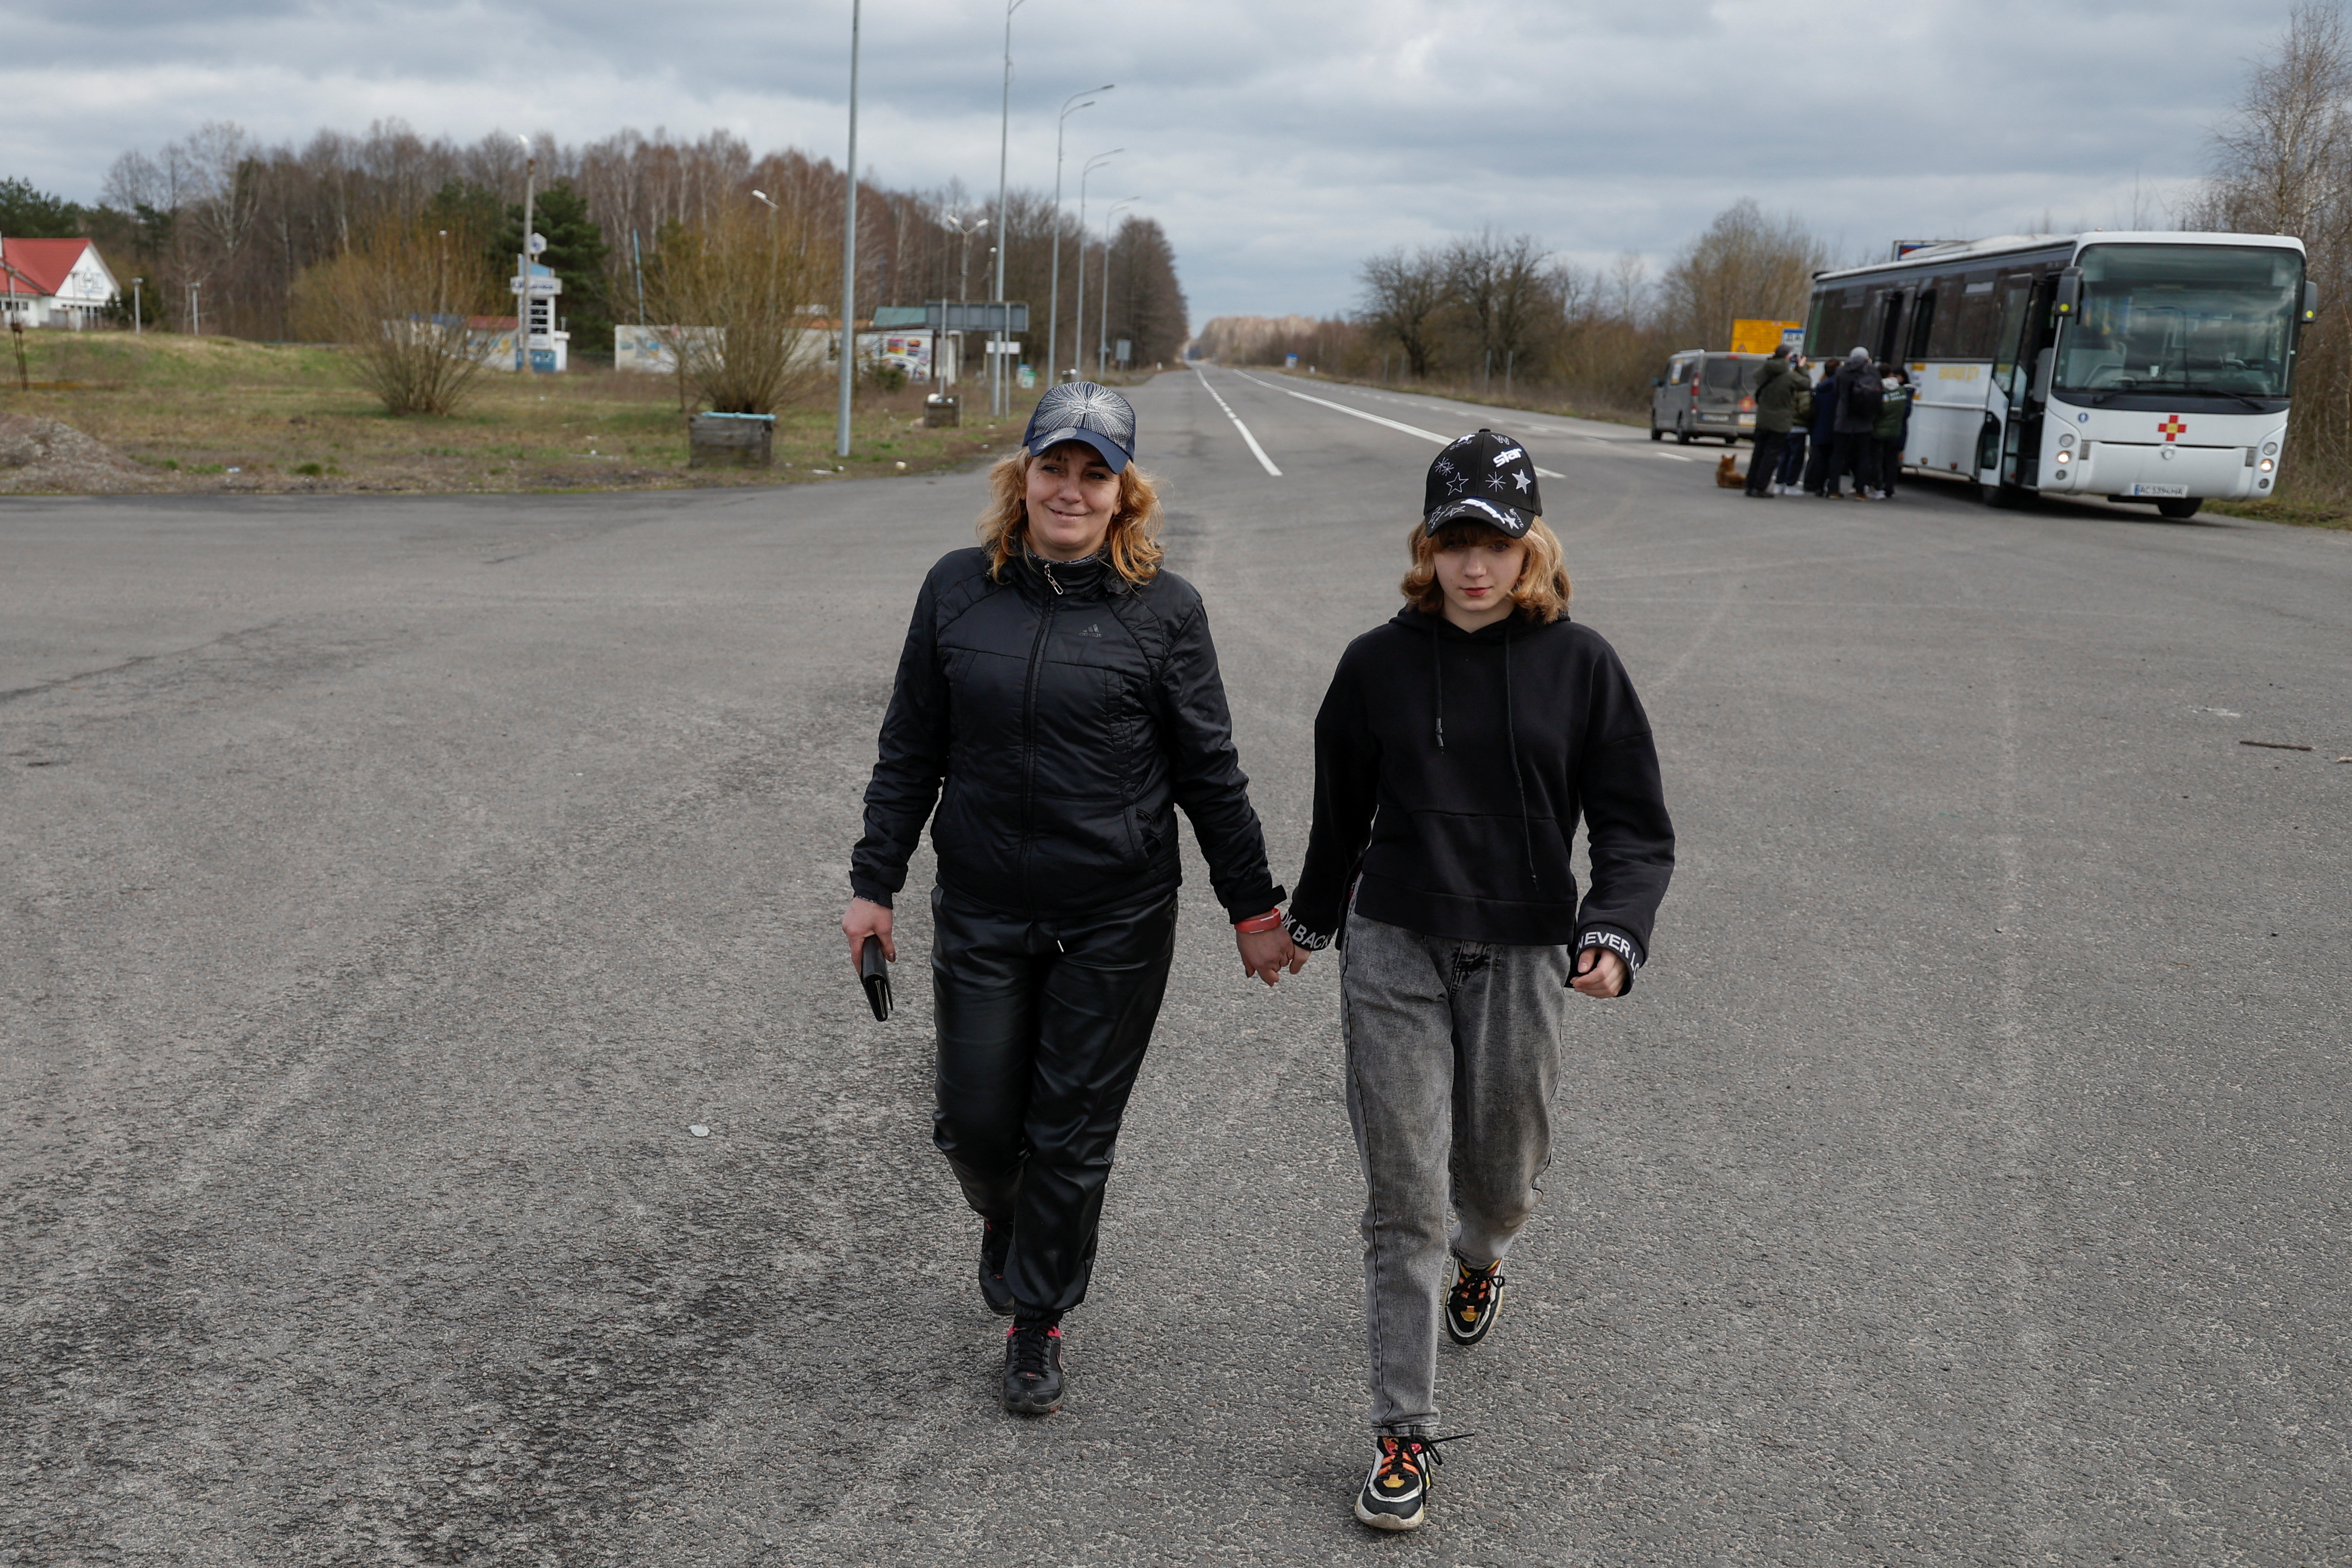 Iryna Hrinchenko smiles as she walks with her daughter Anastasiia, who was taken to Russia, after returning via the Ukraine-Belarus border, in Volyn region